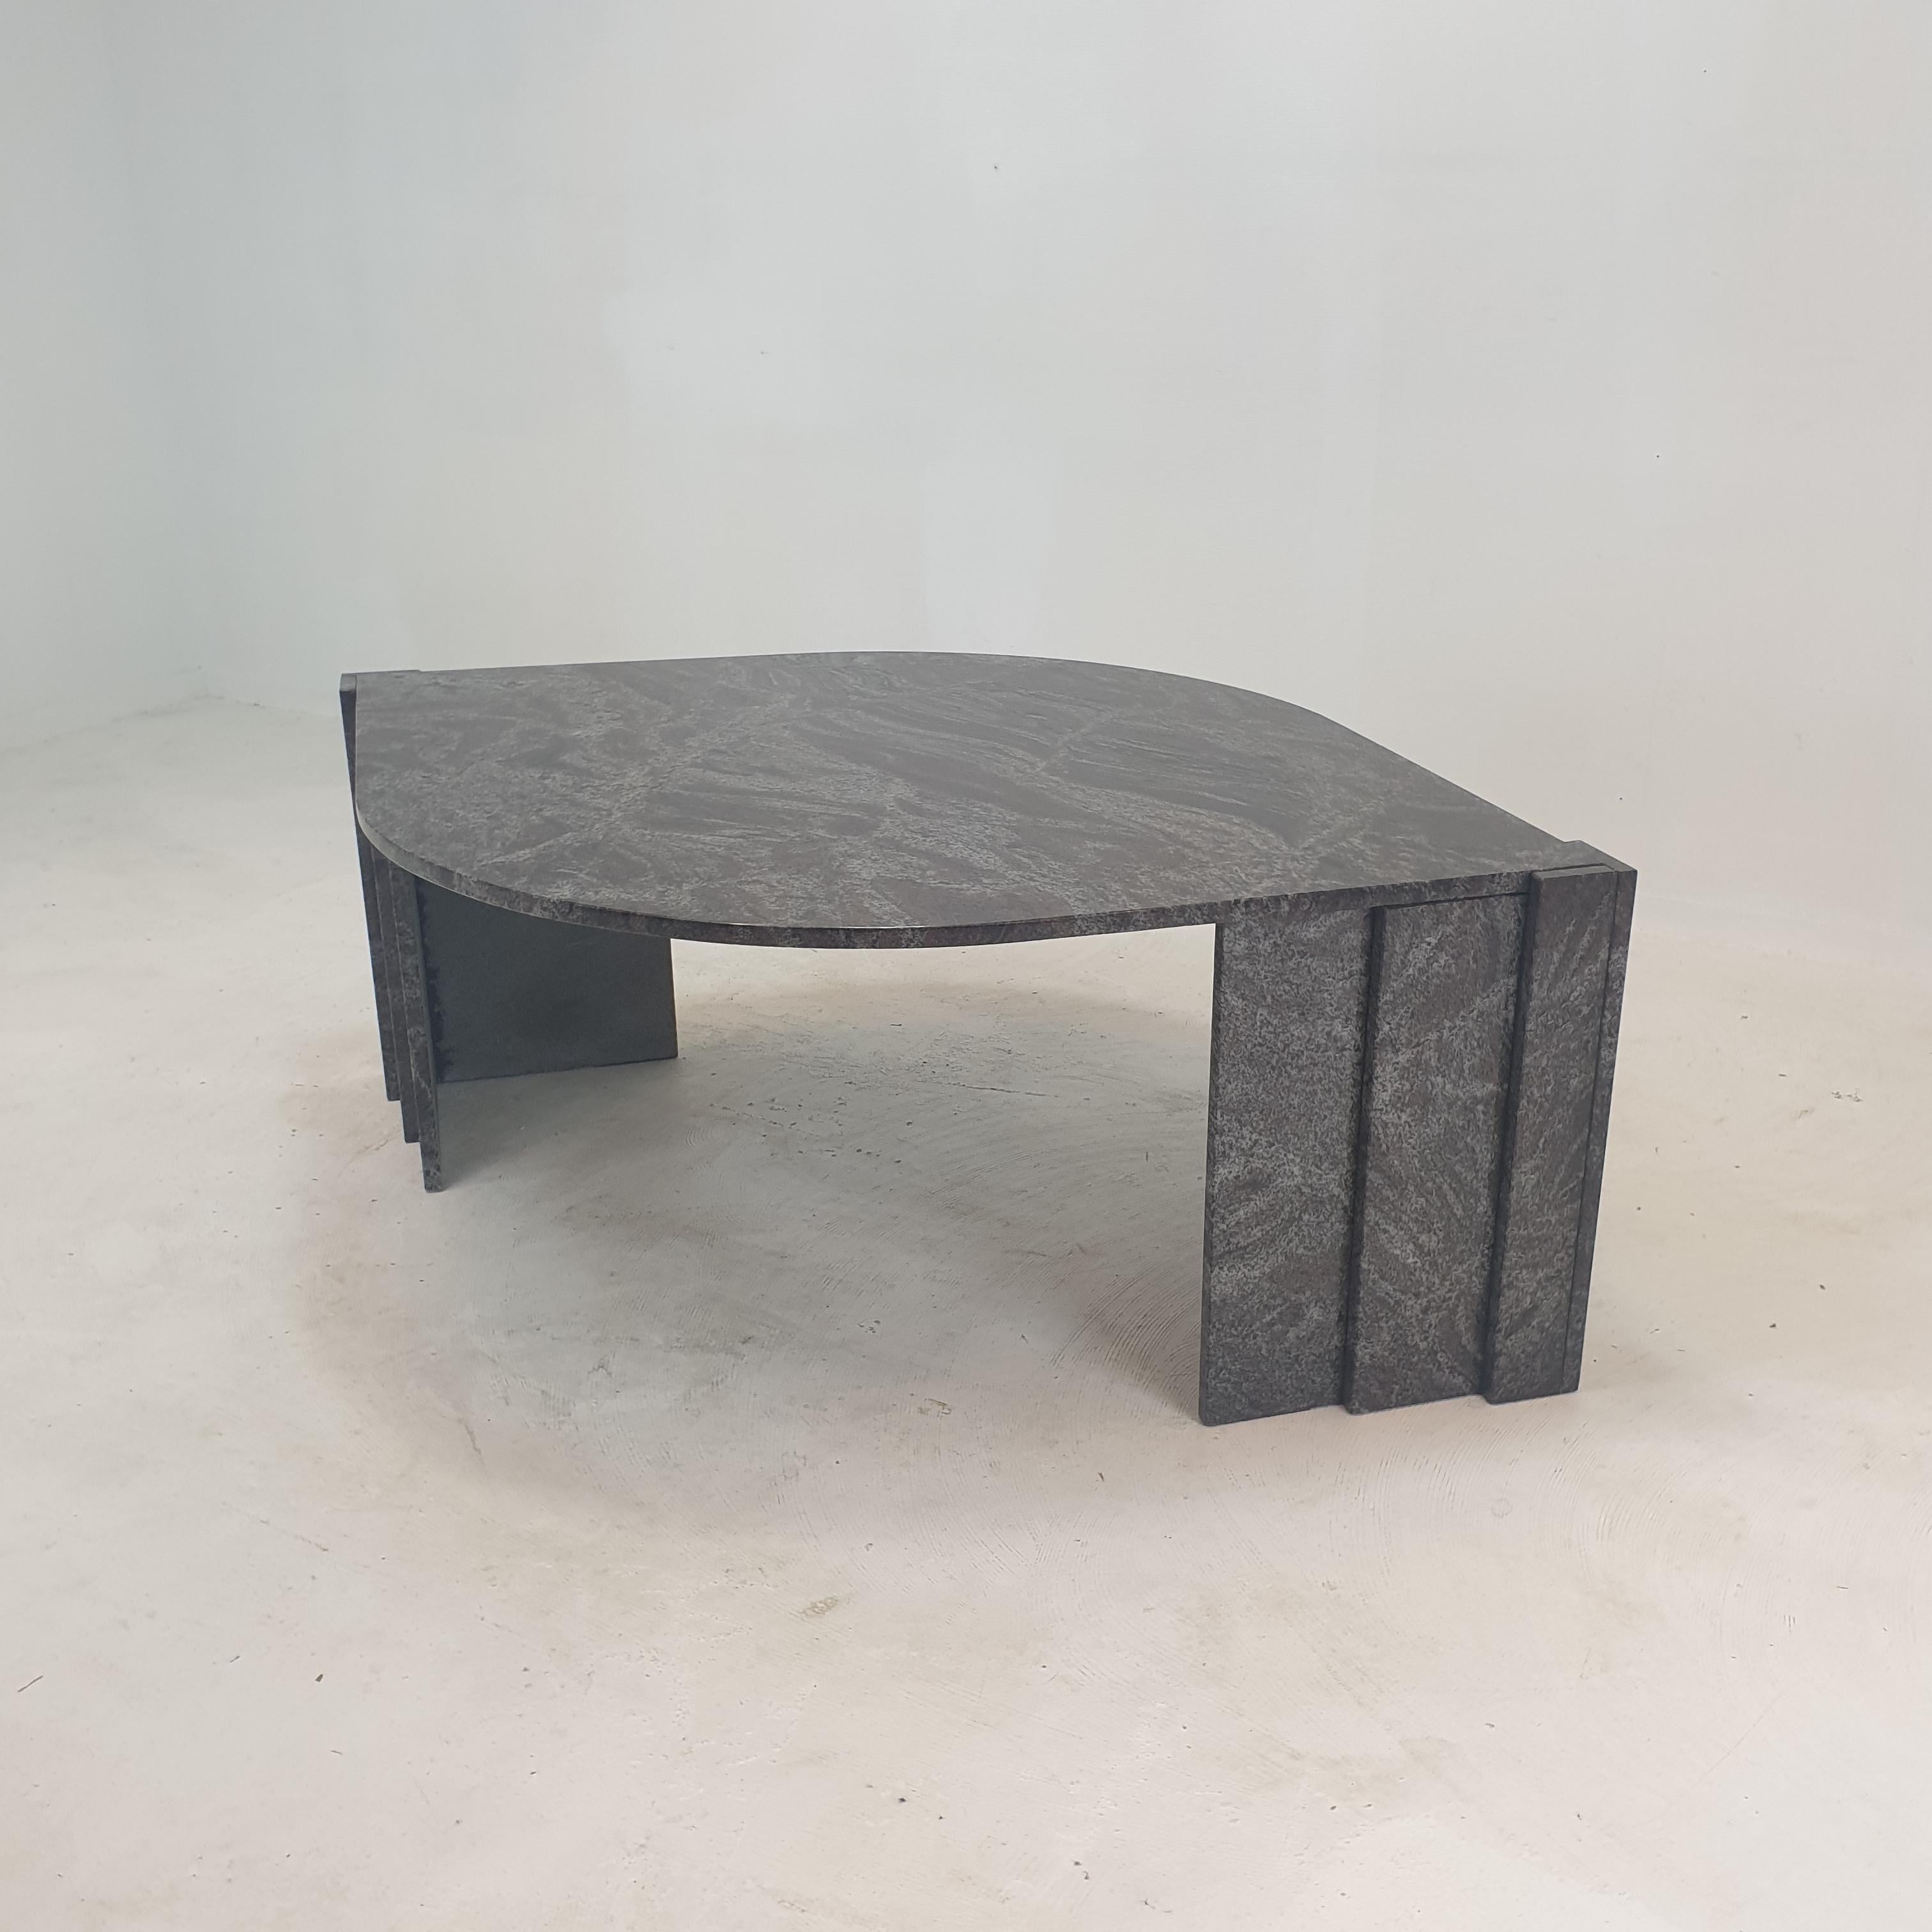 Very elegant Italian coffee table handcrafted out of granite, 1980's.

It has a very nice teardrop shaped top. 
It is made of beautiful granite.

The base is made of two separate pieces.

It has the normal traces of use, see the